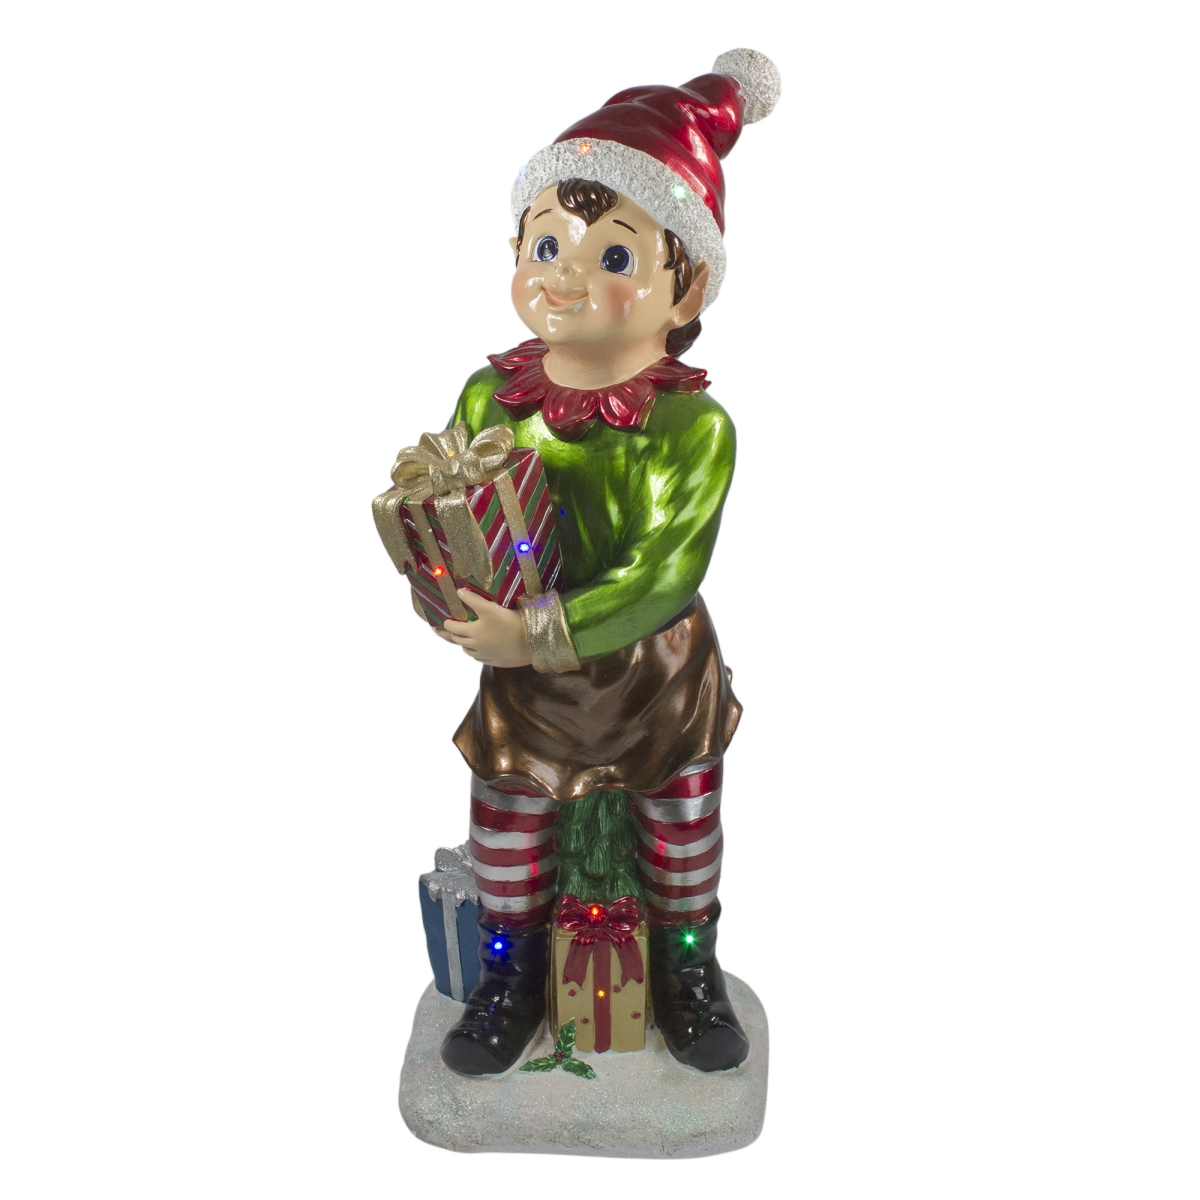 Northlight 33530772 37.5 in. LED Lighted Pixie Elf Commercial Grade Outdoor Christmas Decoration